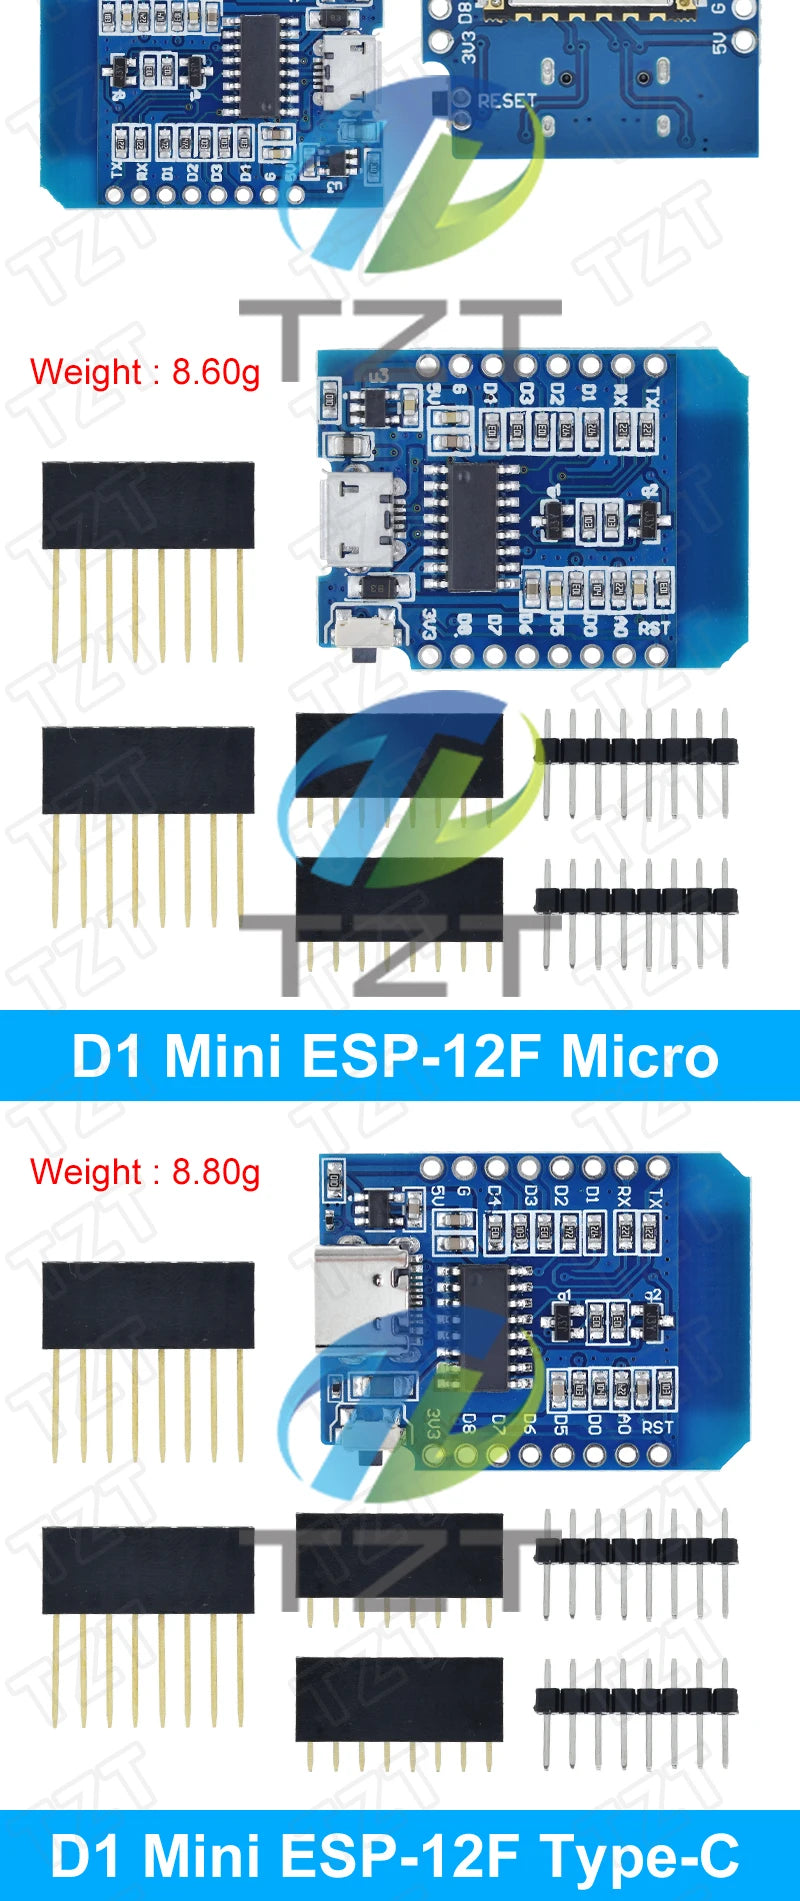 RCDrone D1 Mini TYPE-C/MICRO ESP8266 Voltage Regulator Specifications from Mainland China, new condition.